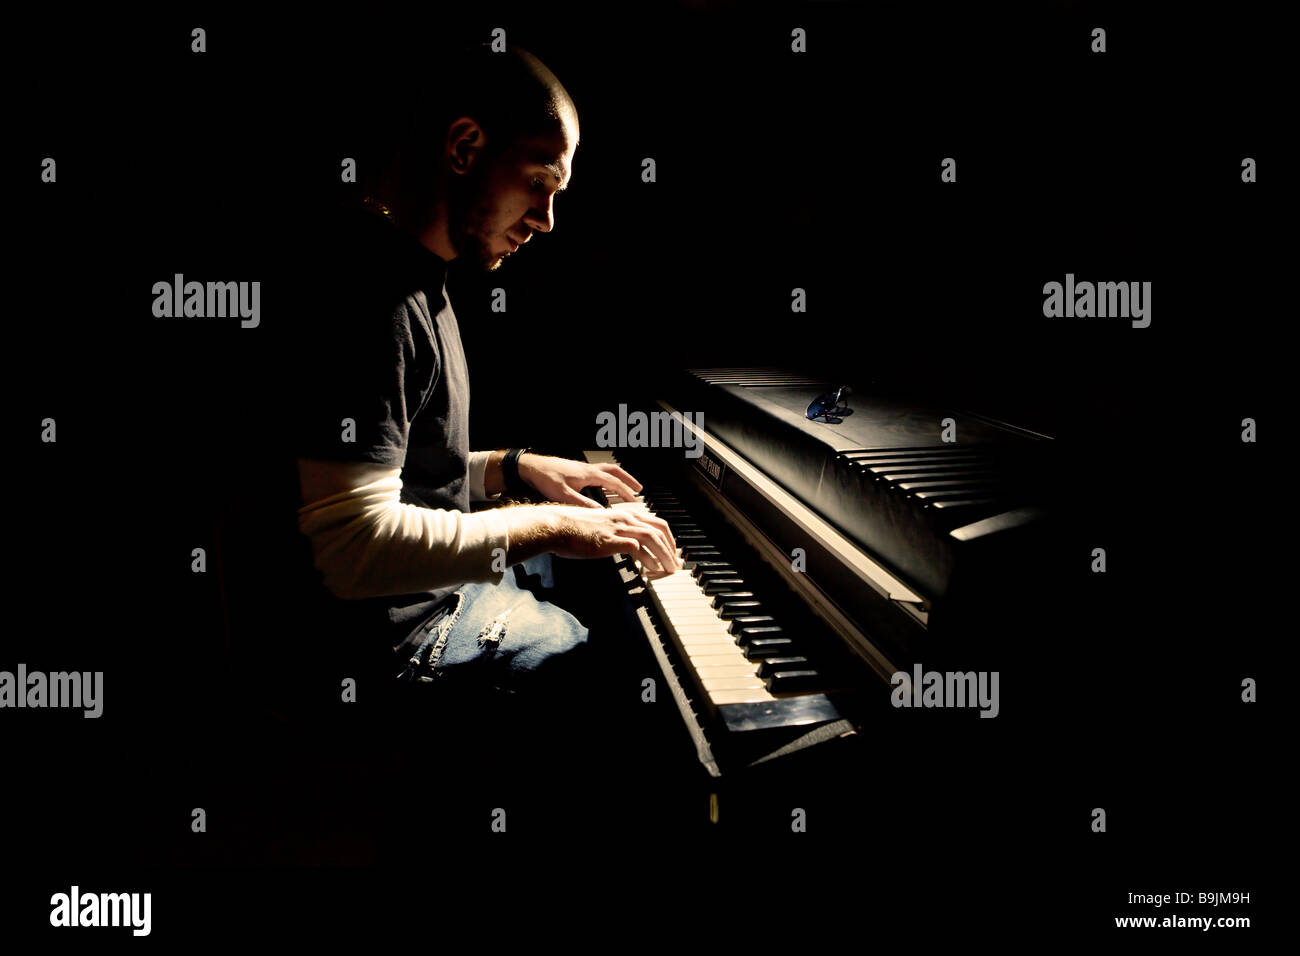 Pianist playing on electric piano Stock Photo